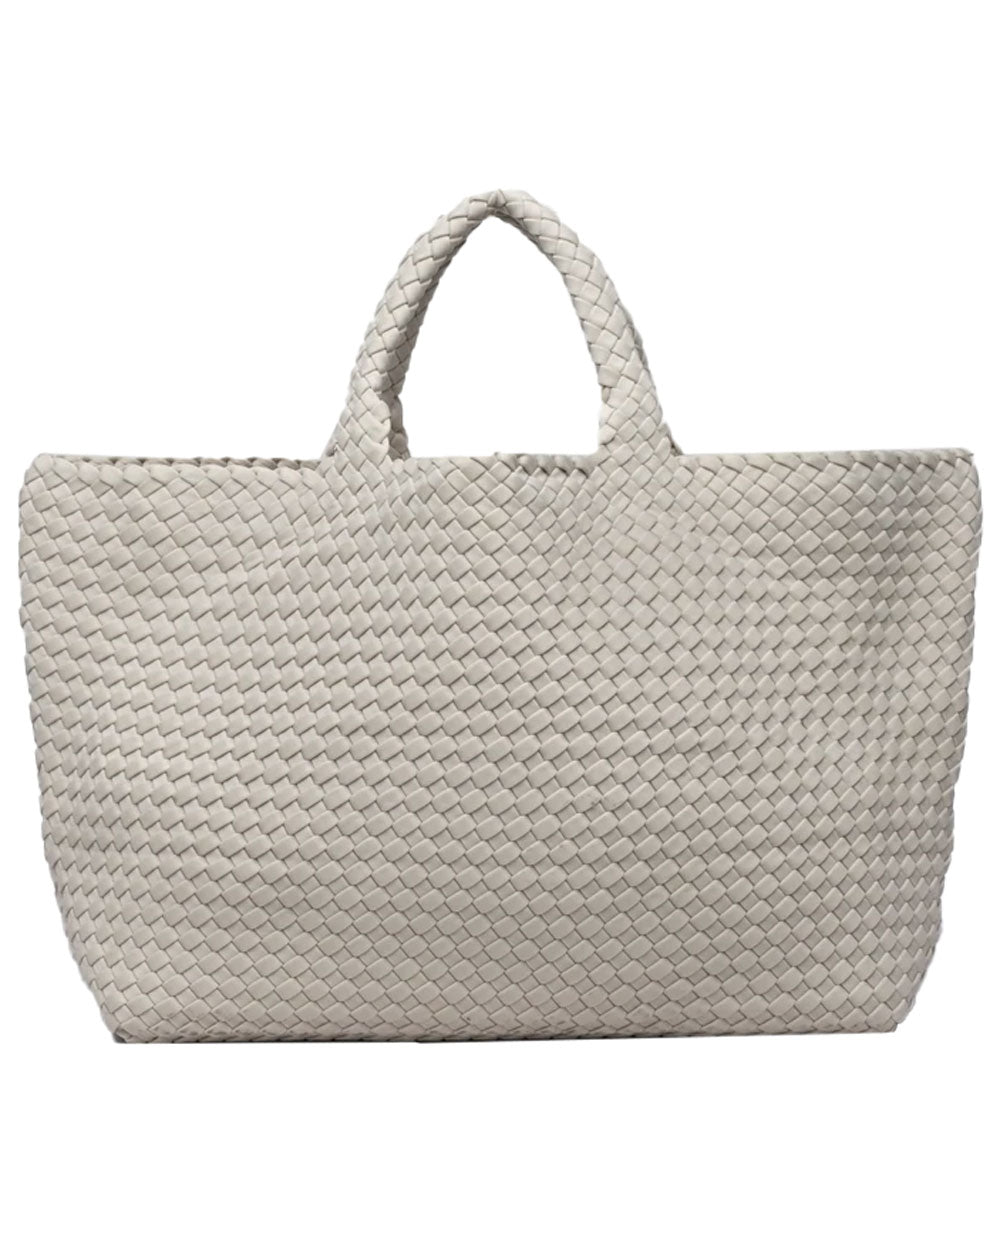 St. Barths Large Tote in Linen